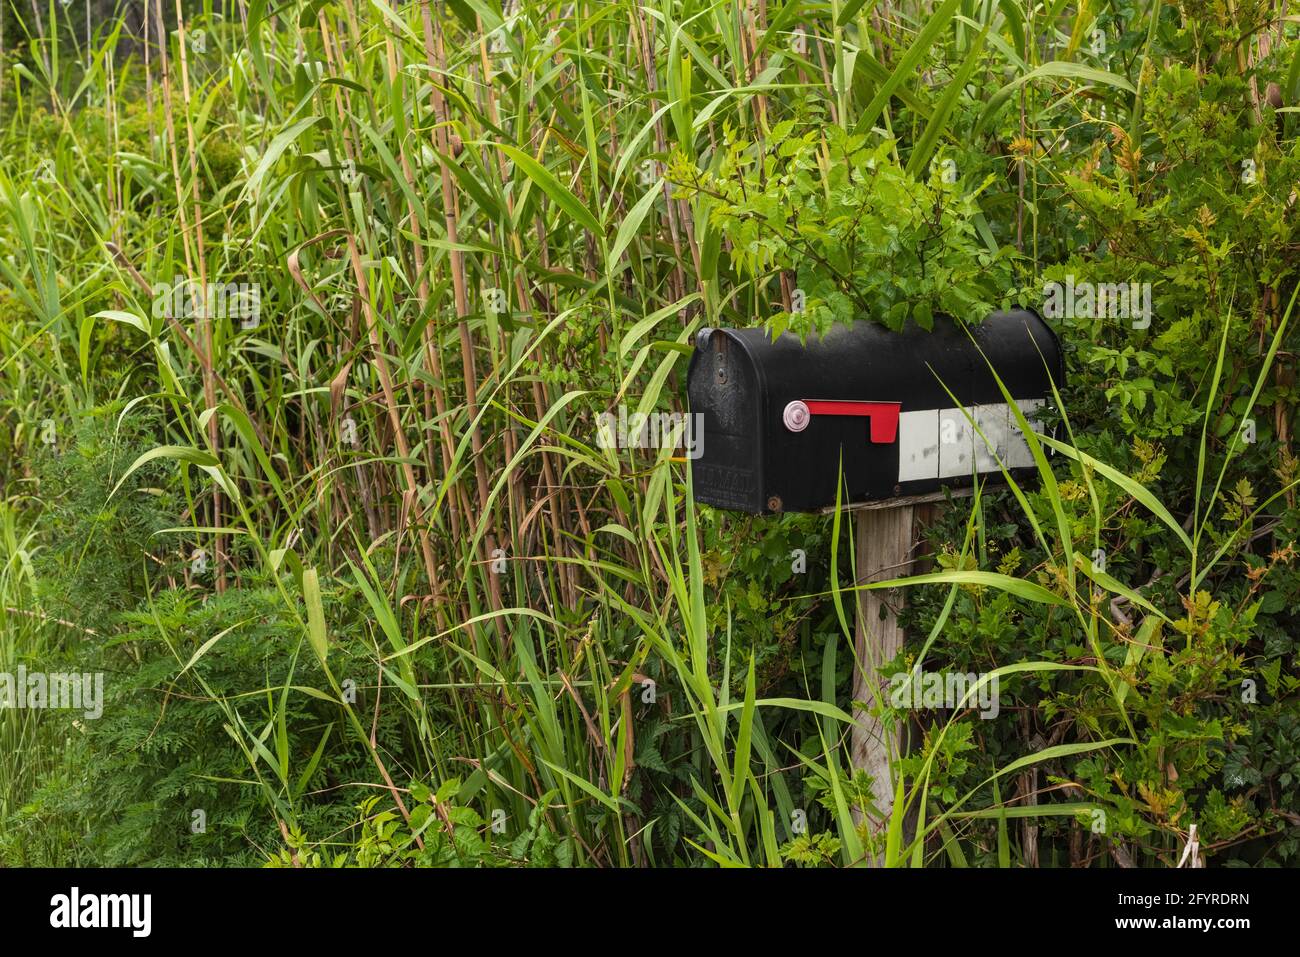 A mailbox is nearly lost in grass and other foliage along the side of a road making communication difficult. Stock Photo